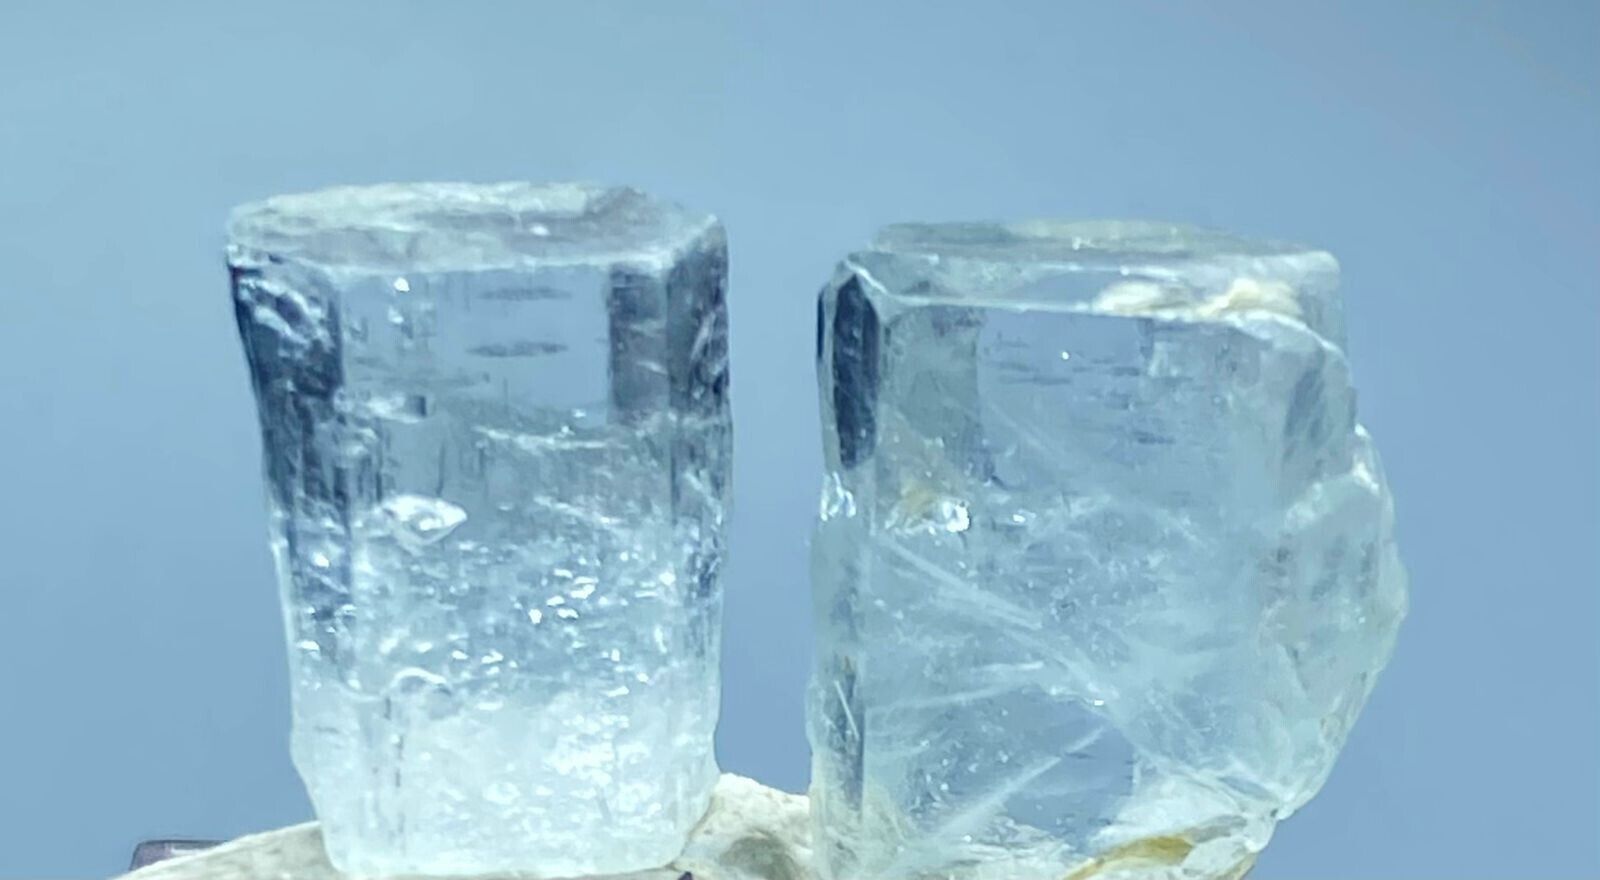 Natural aquamarine Crystal Two Small Peices From Skardu Pakistan 9.10 Carats 